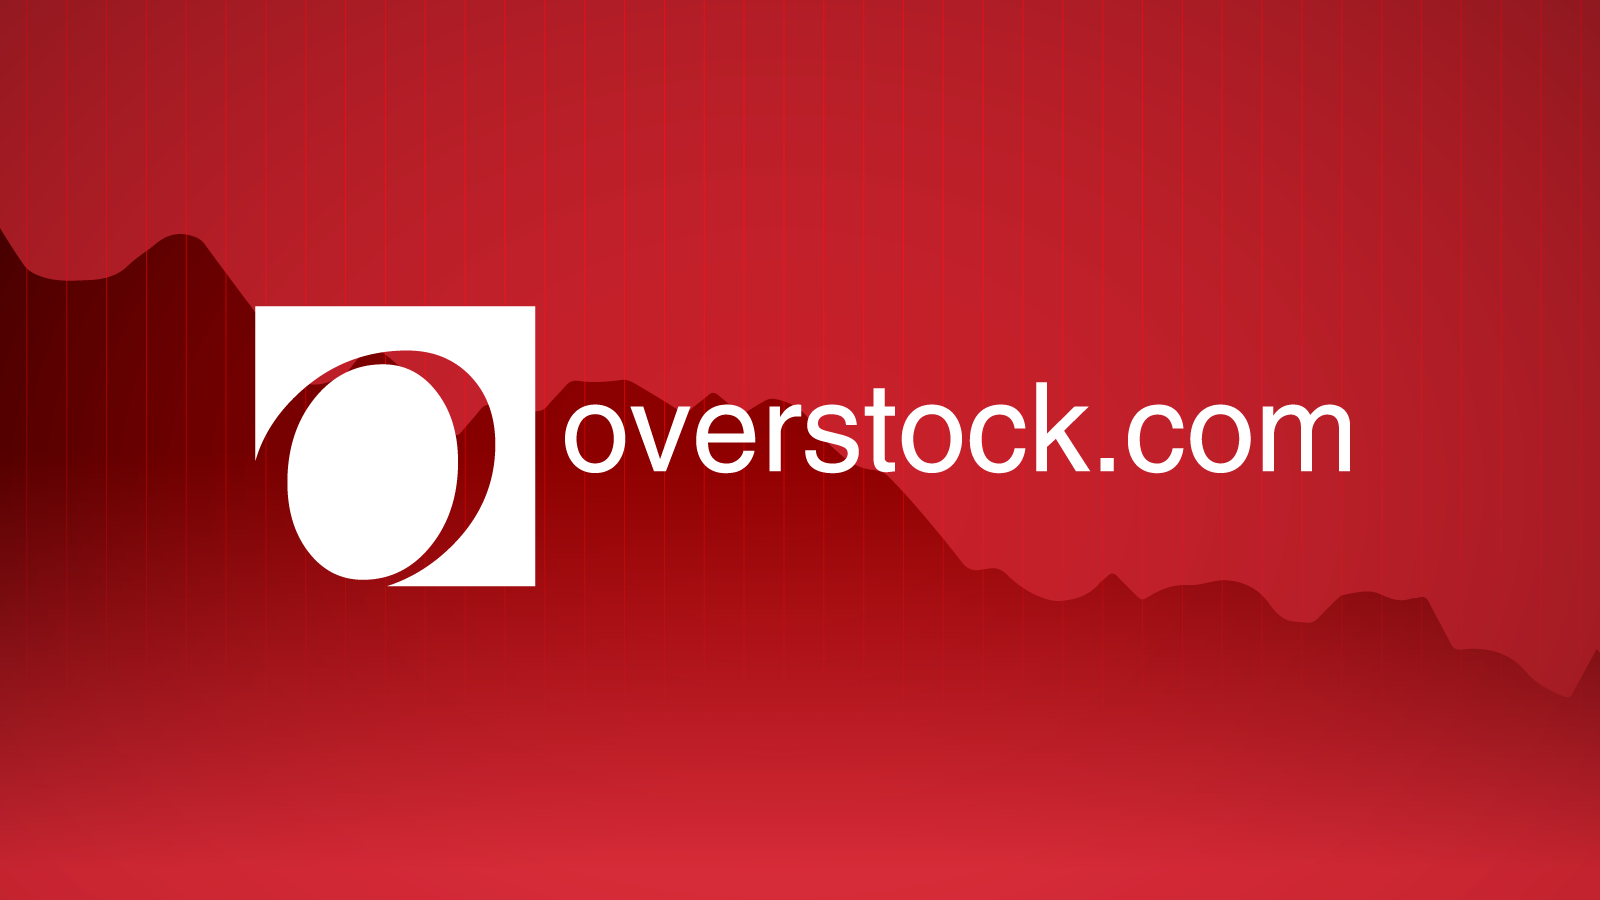 Overstock Will Pay Dividend to Investors In tZero Shares